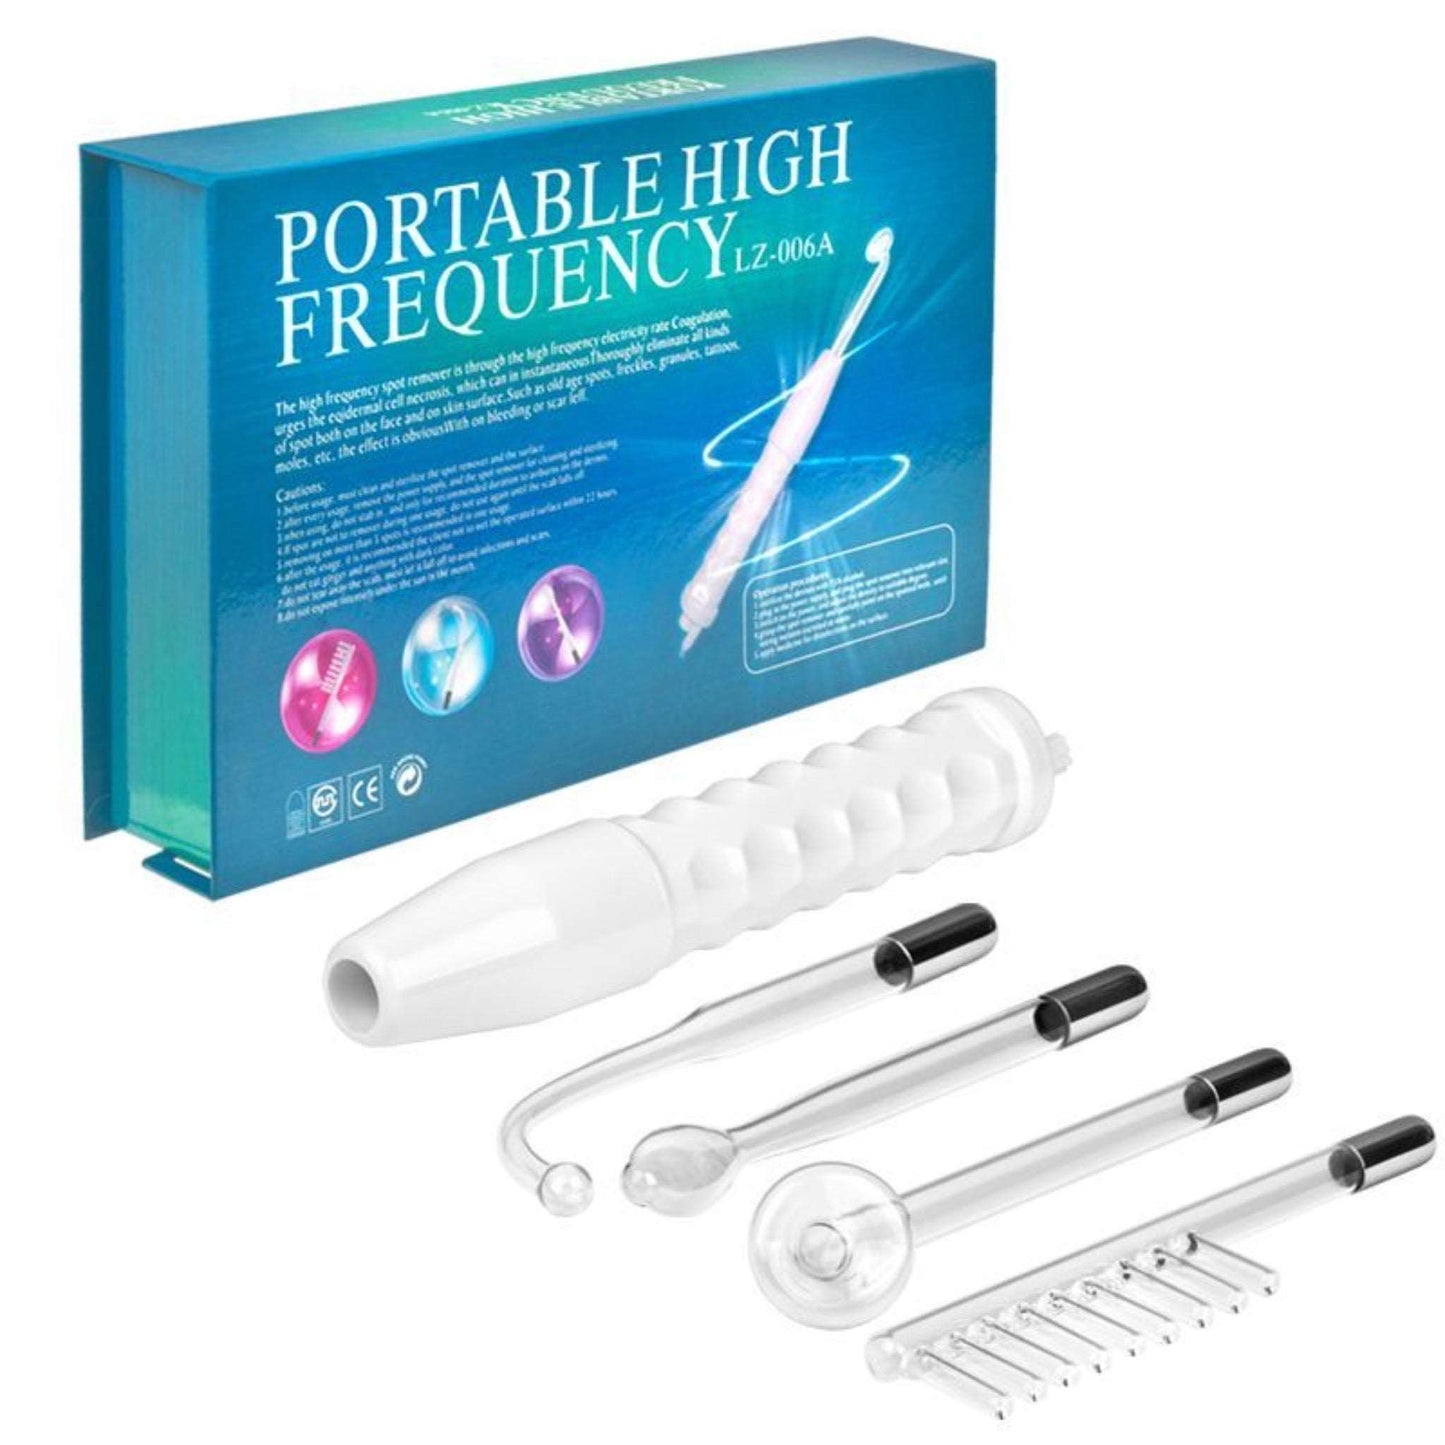  high frequency wand with 4 tubes on display outside a blue box